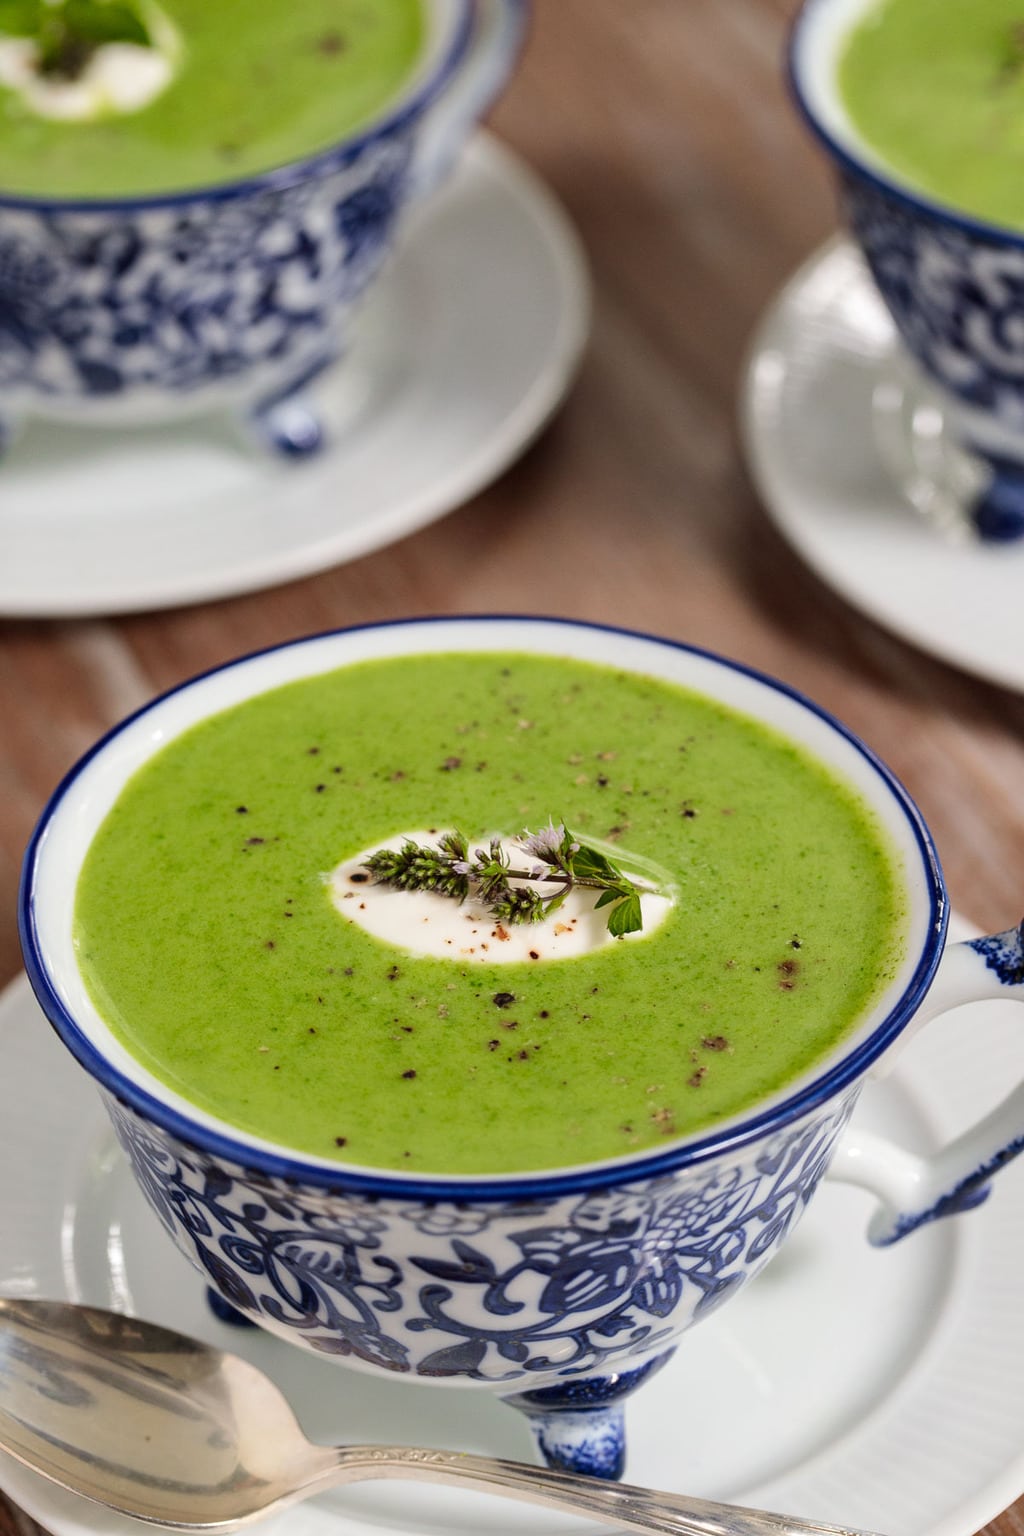 Vertical picture of spinach soup in a blue and white mug